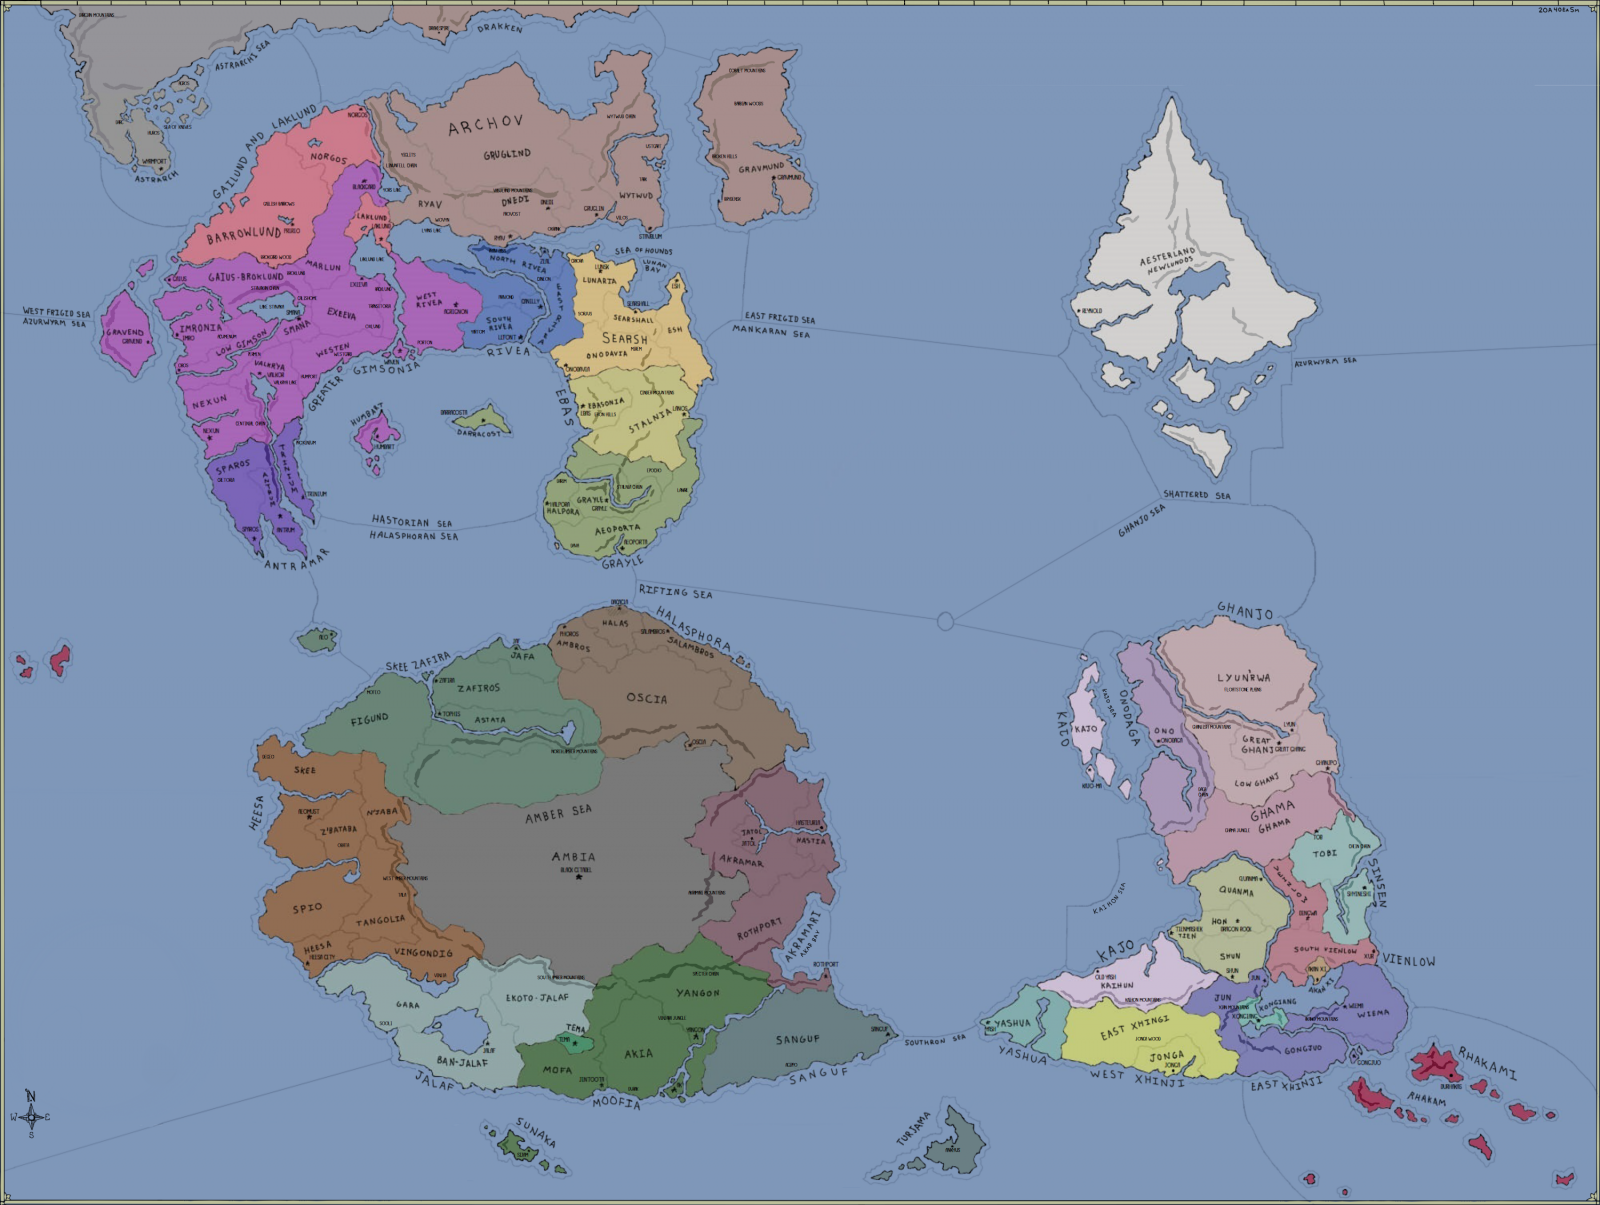 Aph's Administrative regions under Boundlord Rule